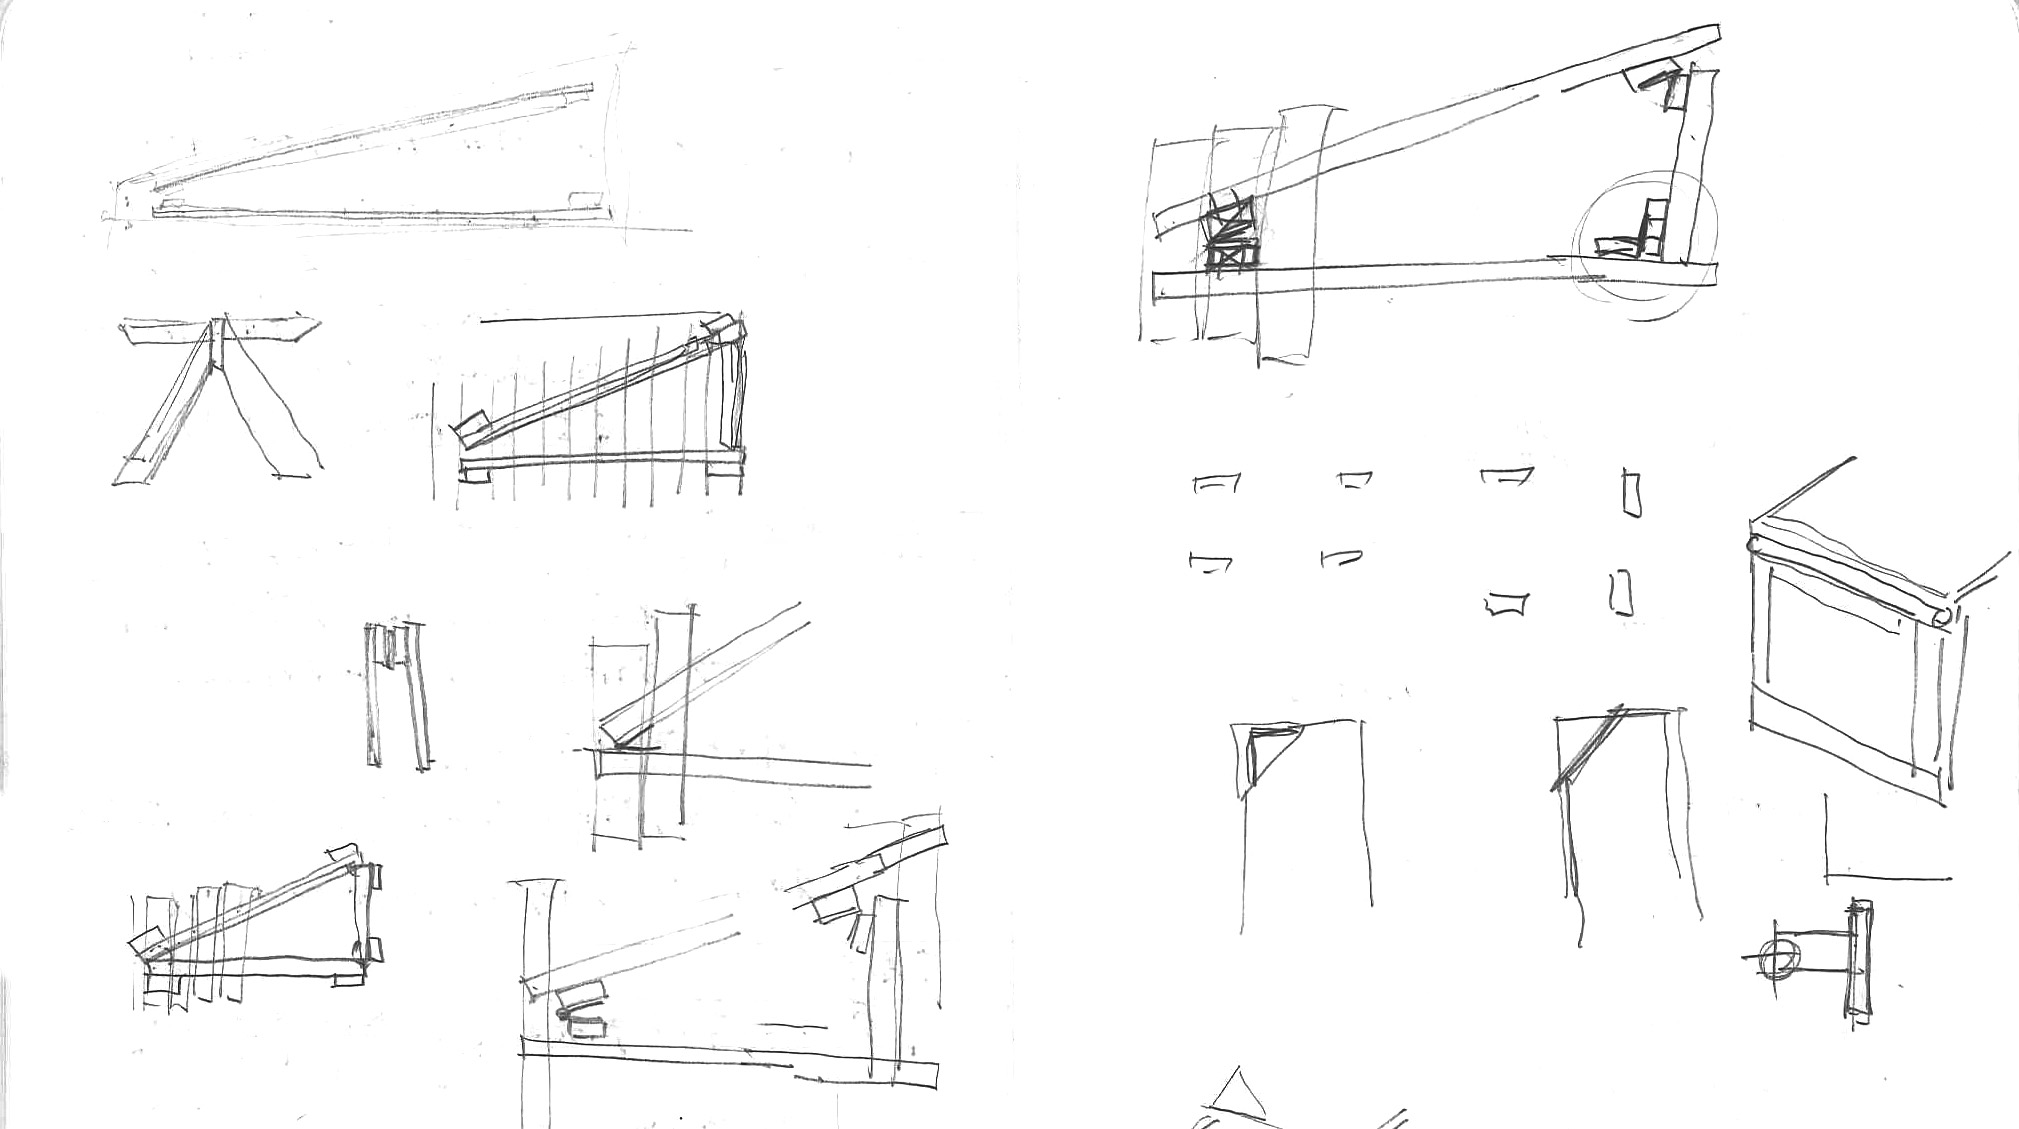  SKETCHES OF "XYLOPHONE" TABLE 